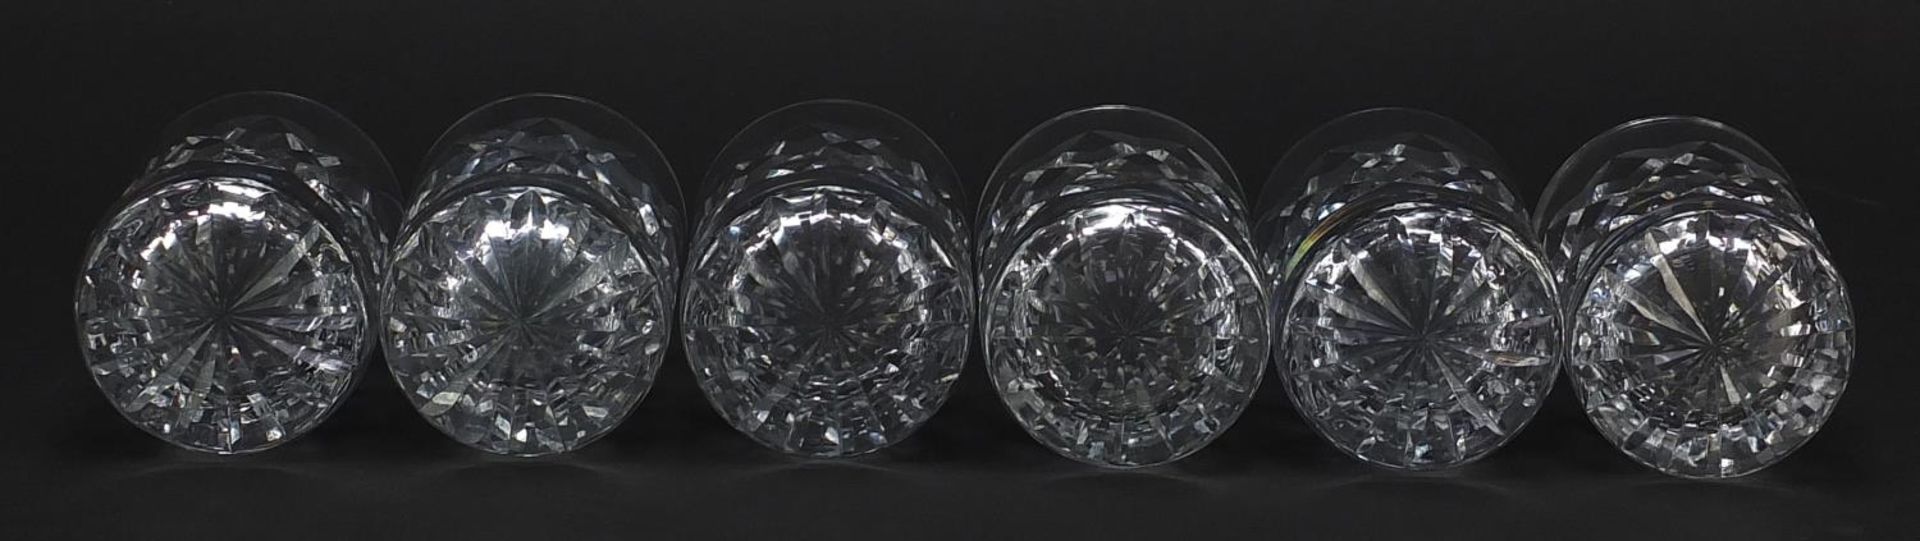 Six lead crystal whiskey tumblers, 8cm high - Image 6 of 6